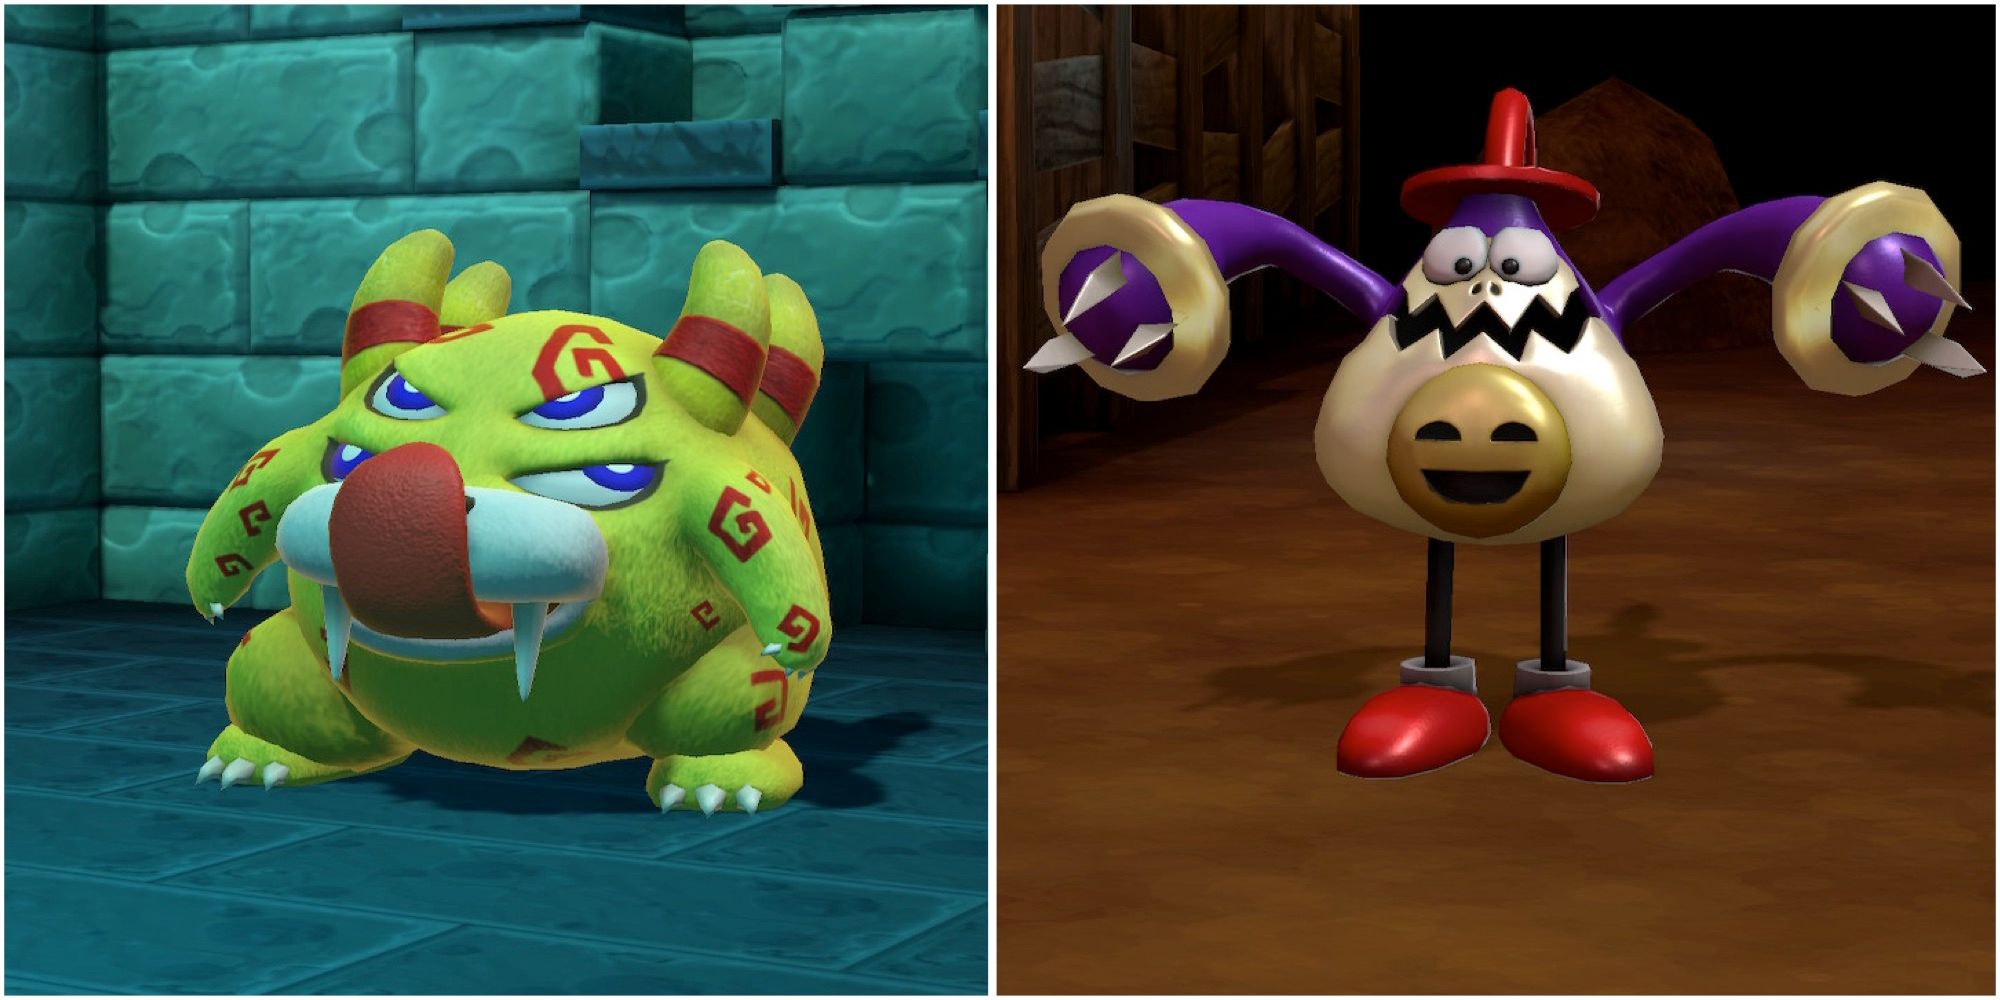 Belome and Punchinello in Super Mario RPG